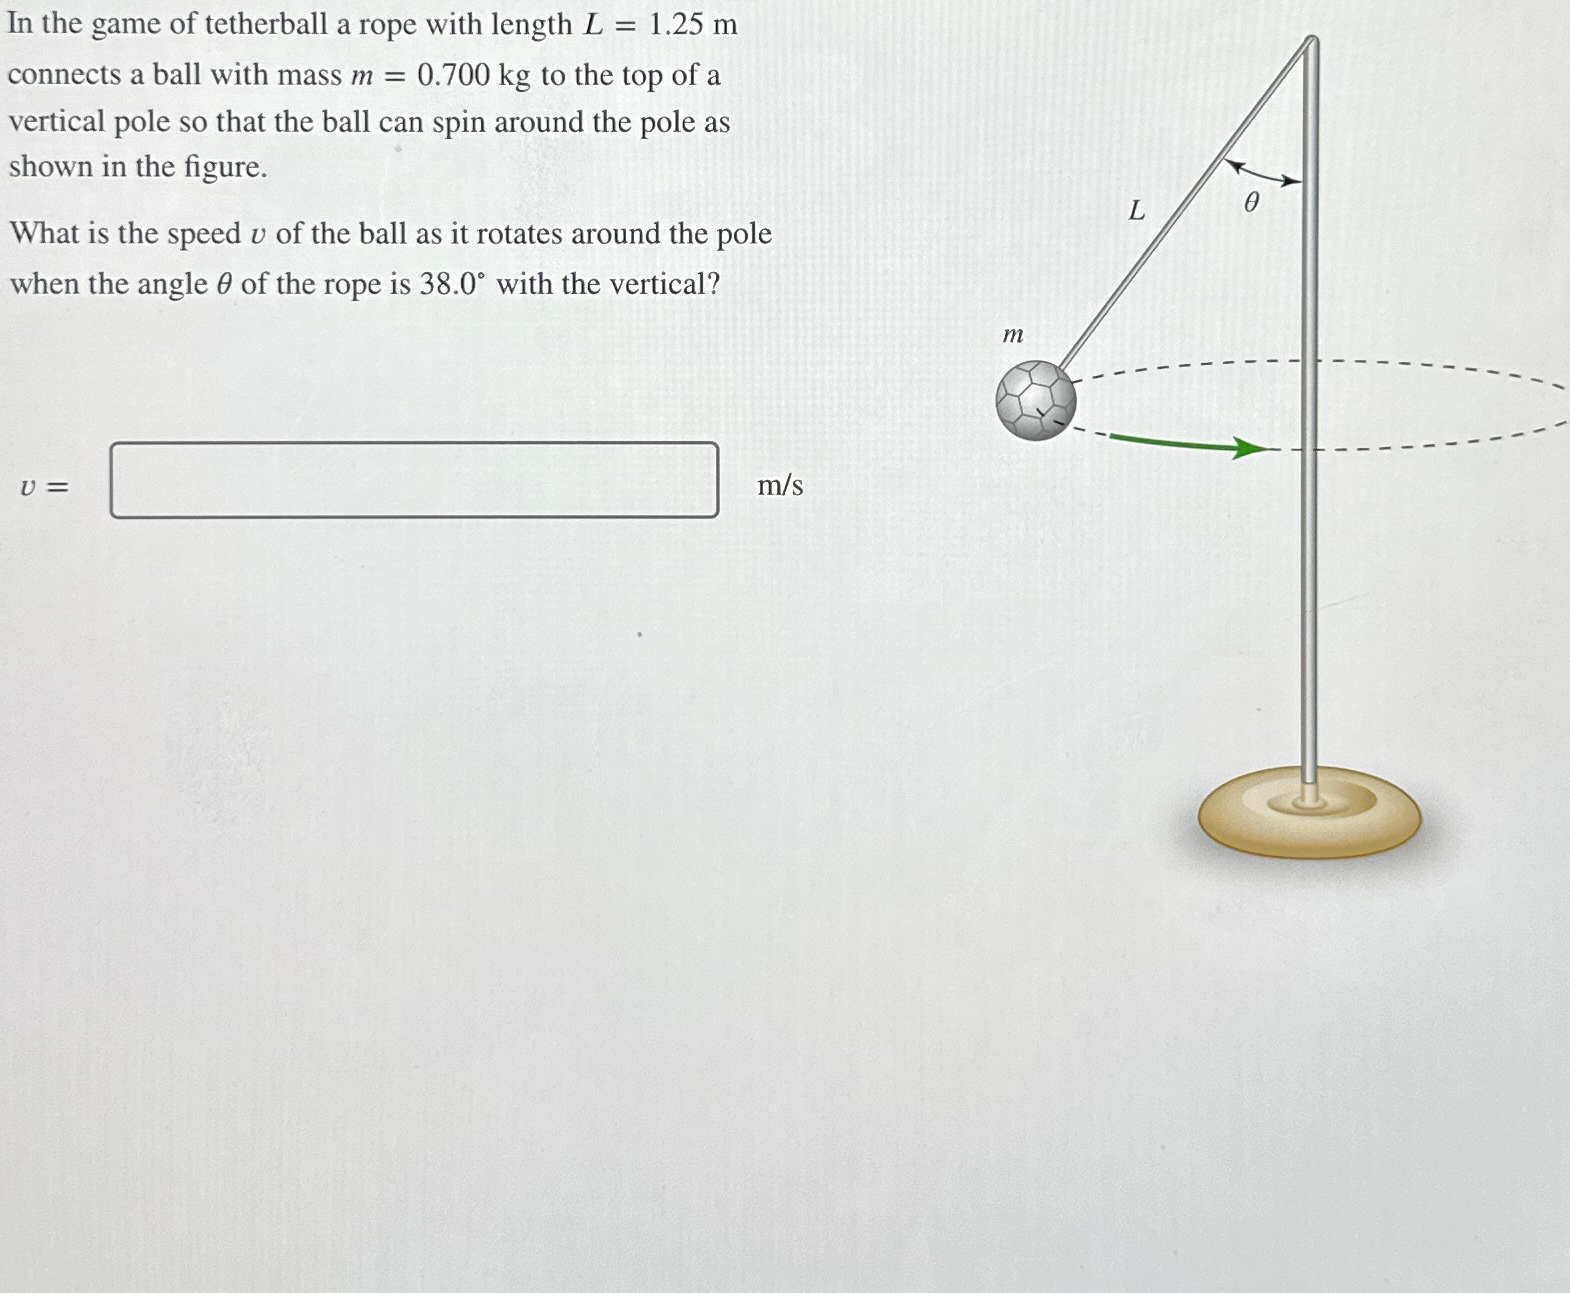 Solved In the game of tetherball a rope with length L=1.25m